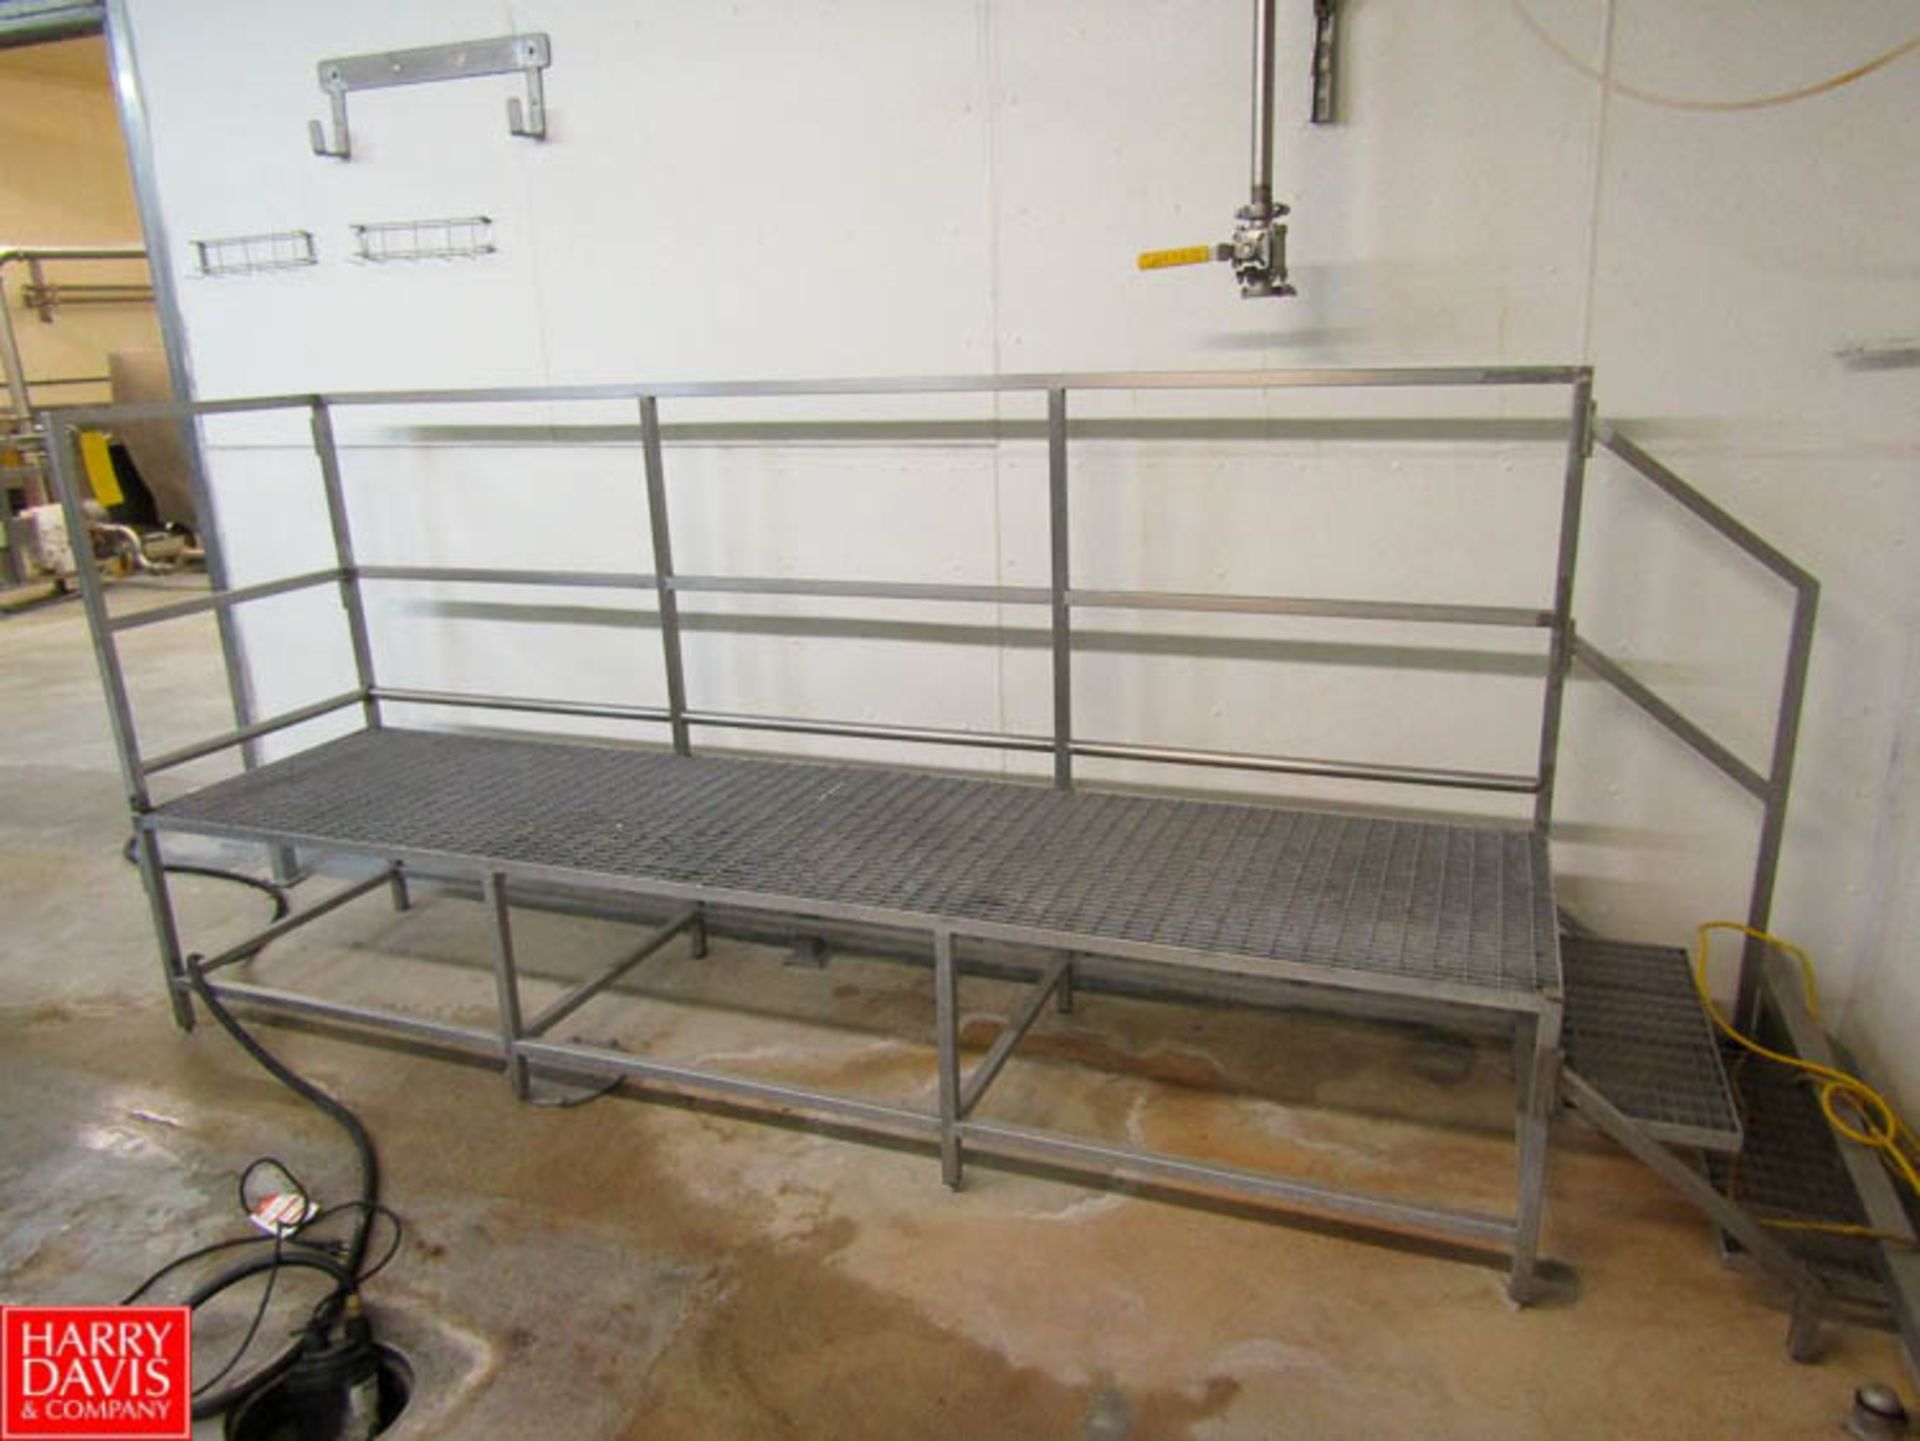 S/S Stair Mezzanine with Fiberglass Grating Dimensions = 12' x 3' Rigging Fee: $ 50